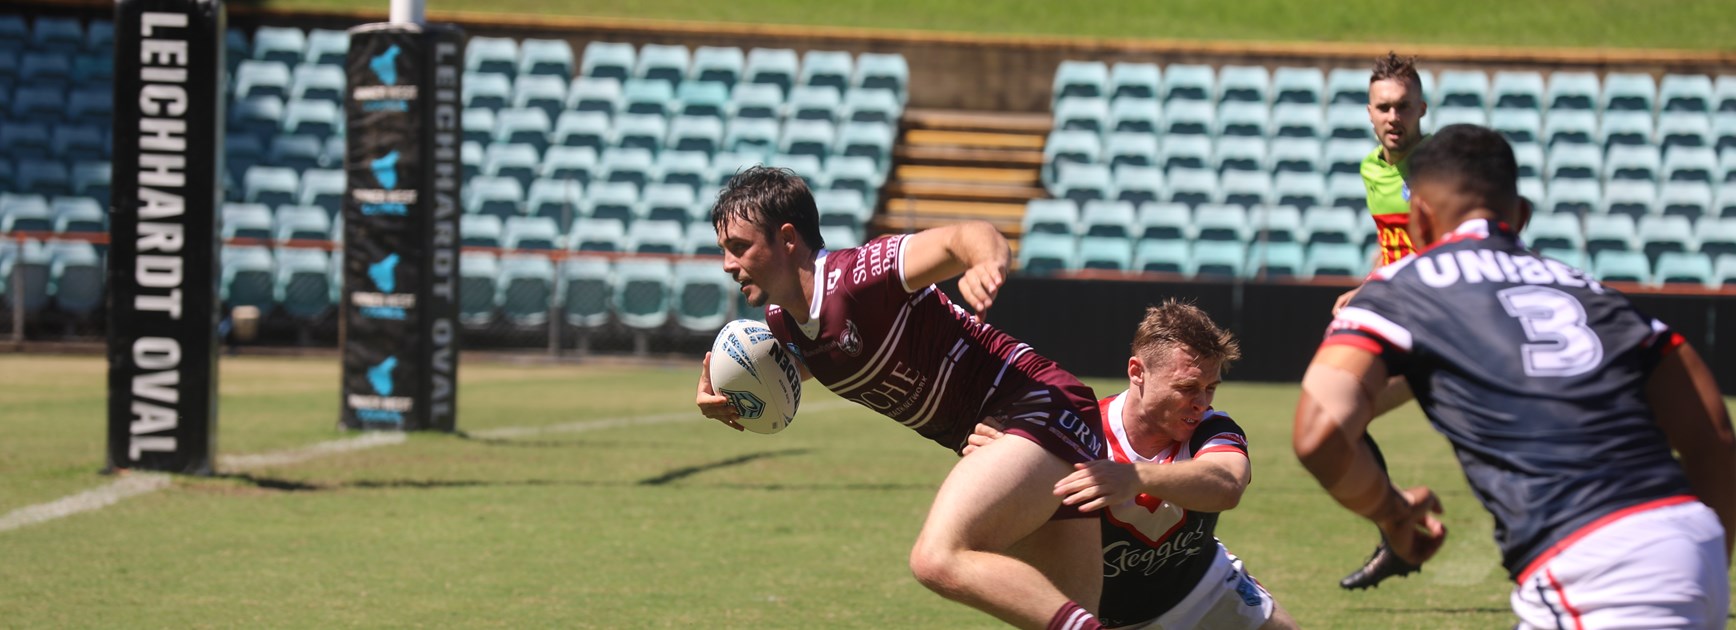 Gallant Sea Eagles lose to Roosters in great contest